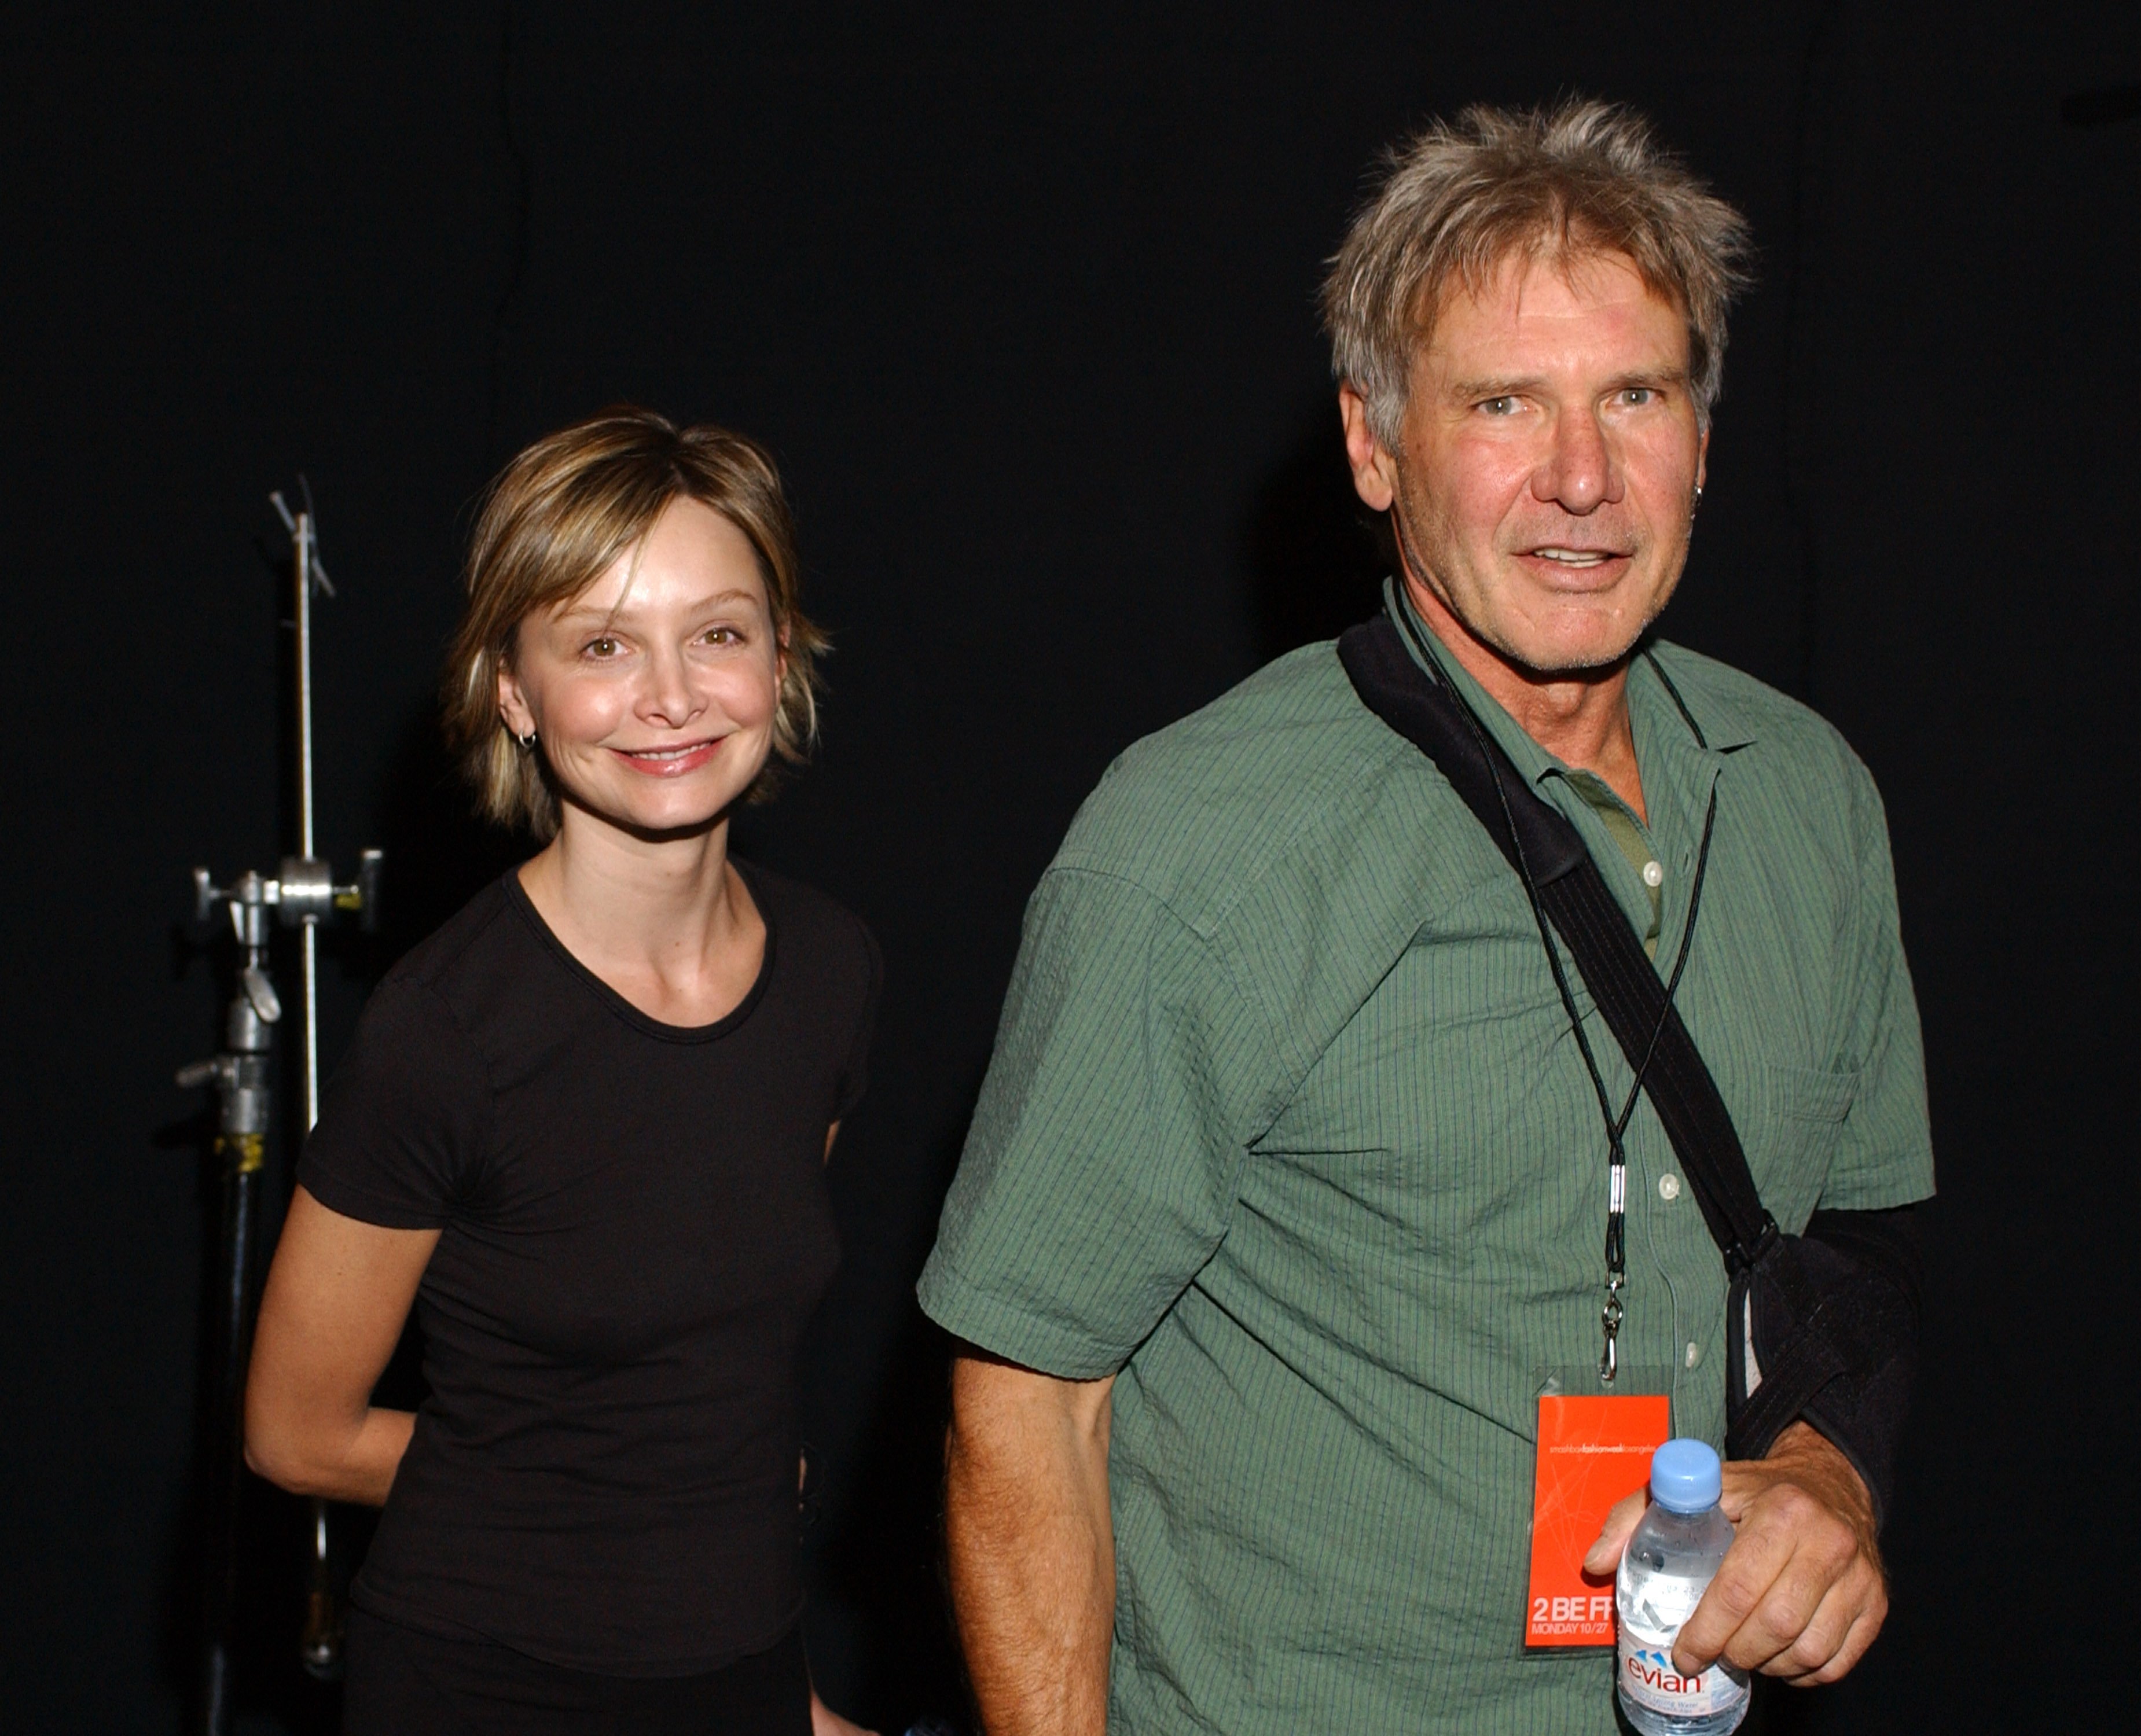 Calista Flockhart and Harrison Ford at the Smashbox LA Fashion Week Spring in Culver City, California, on October 27, 2003. | Source: Getty Images